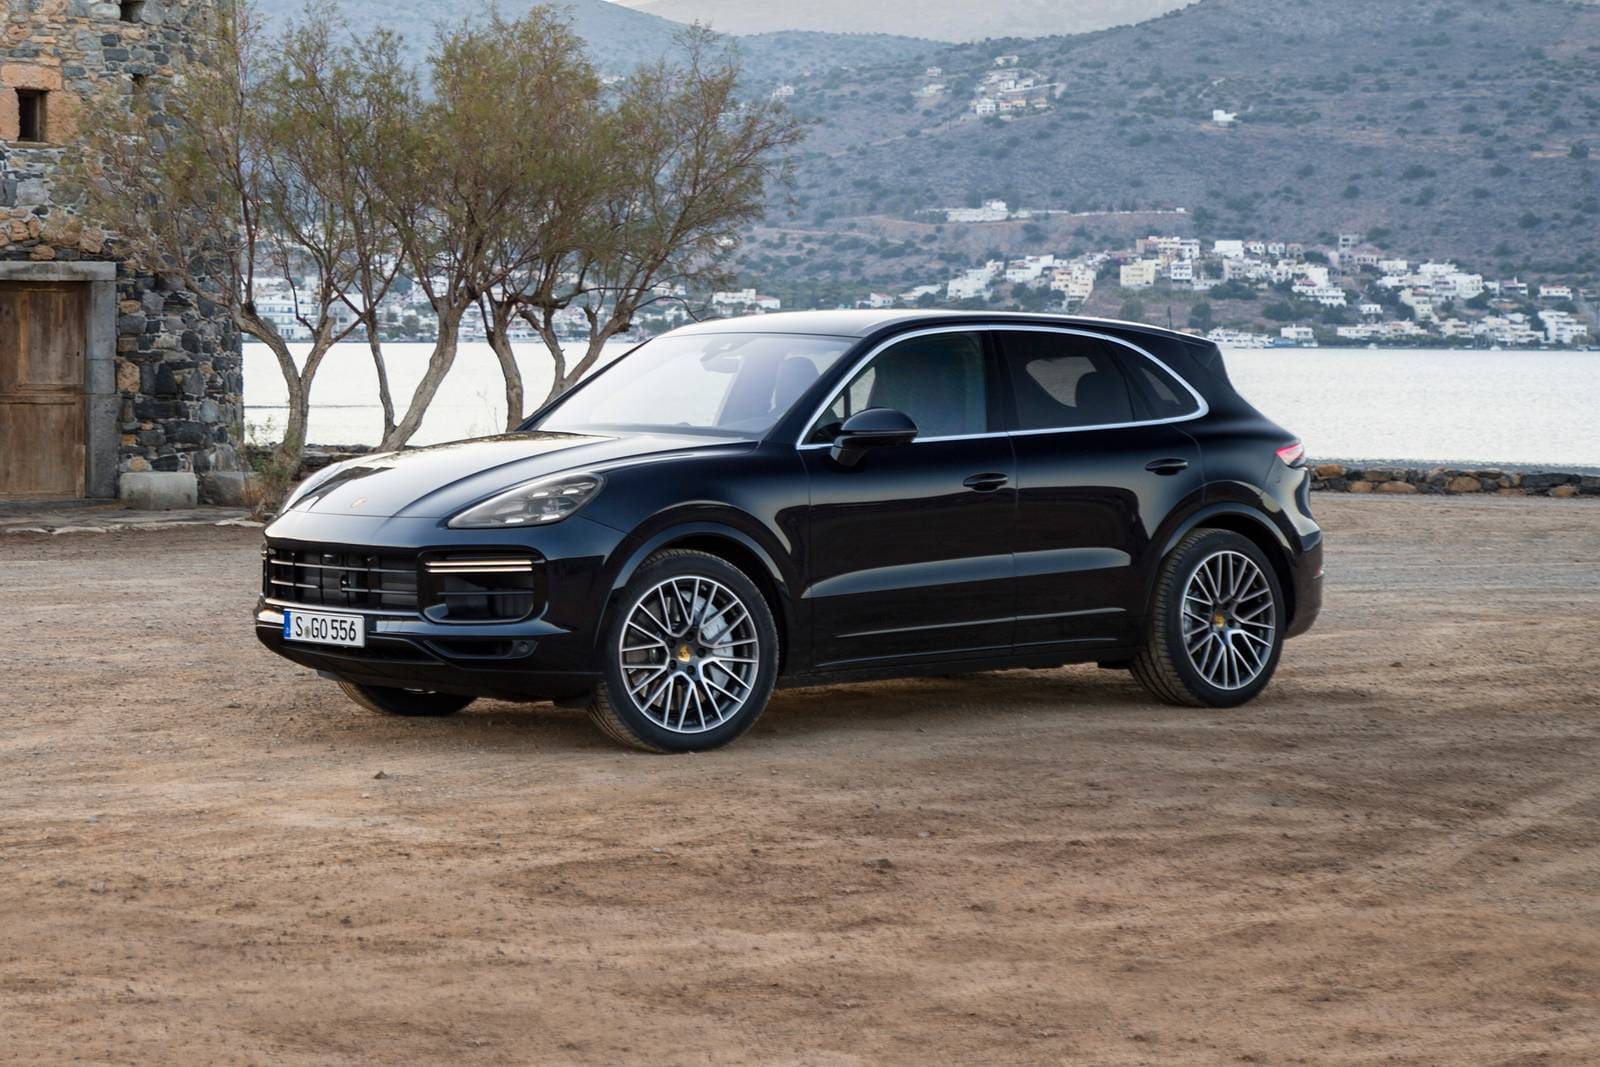 2021 Porsche Cayenne Prices, Reviews, and Pictures | Edmunds